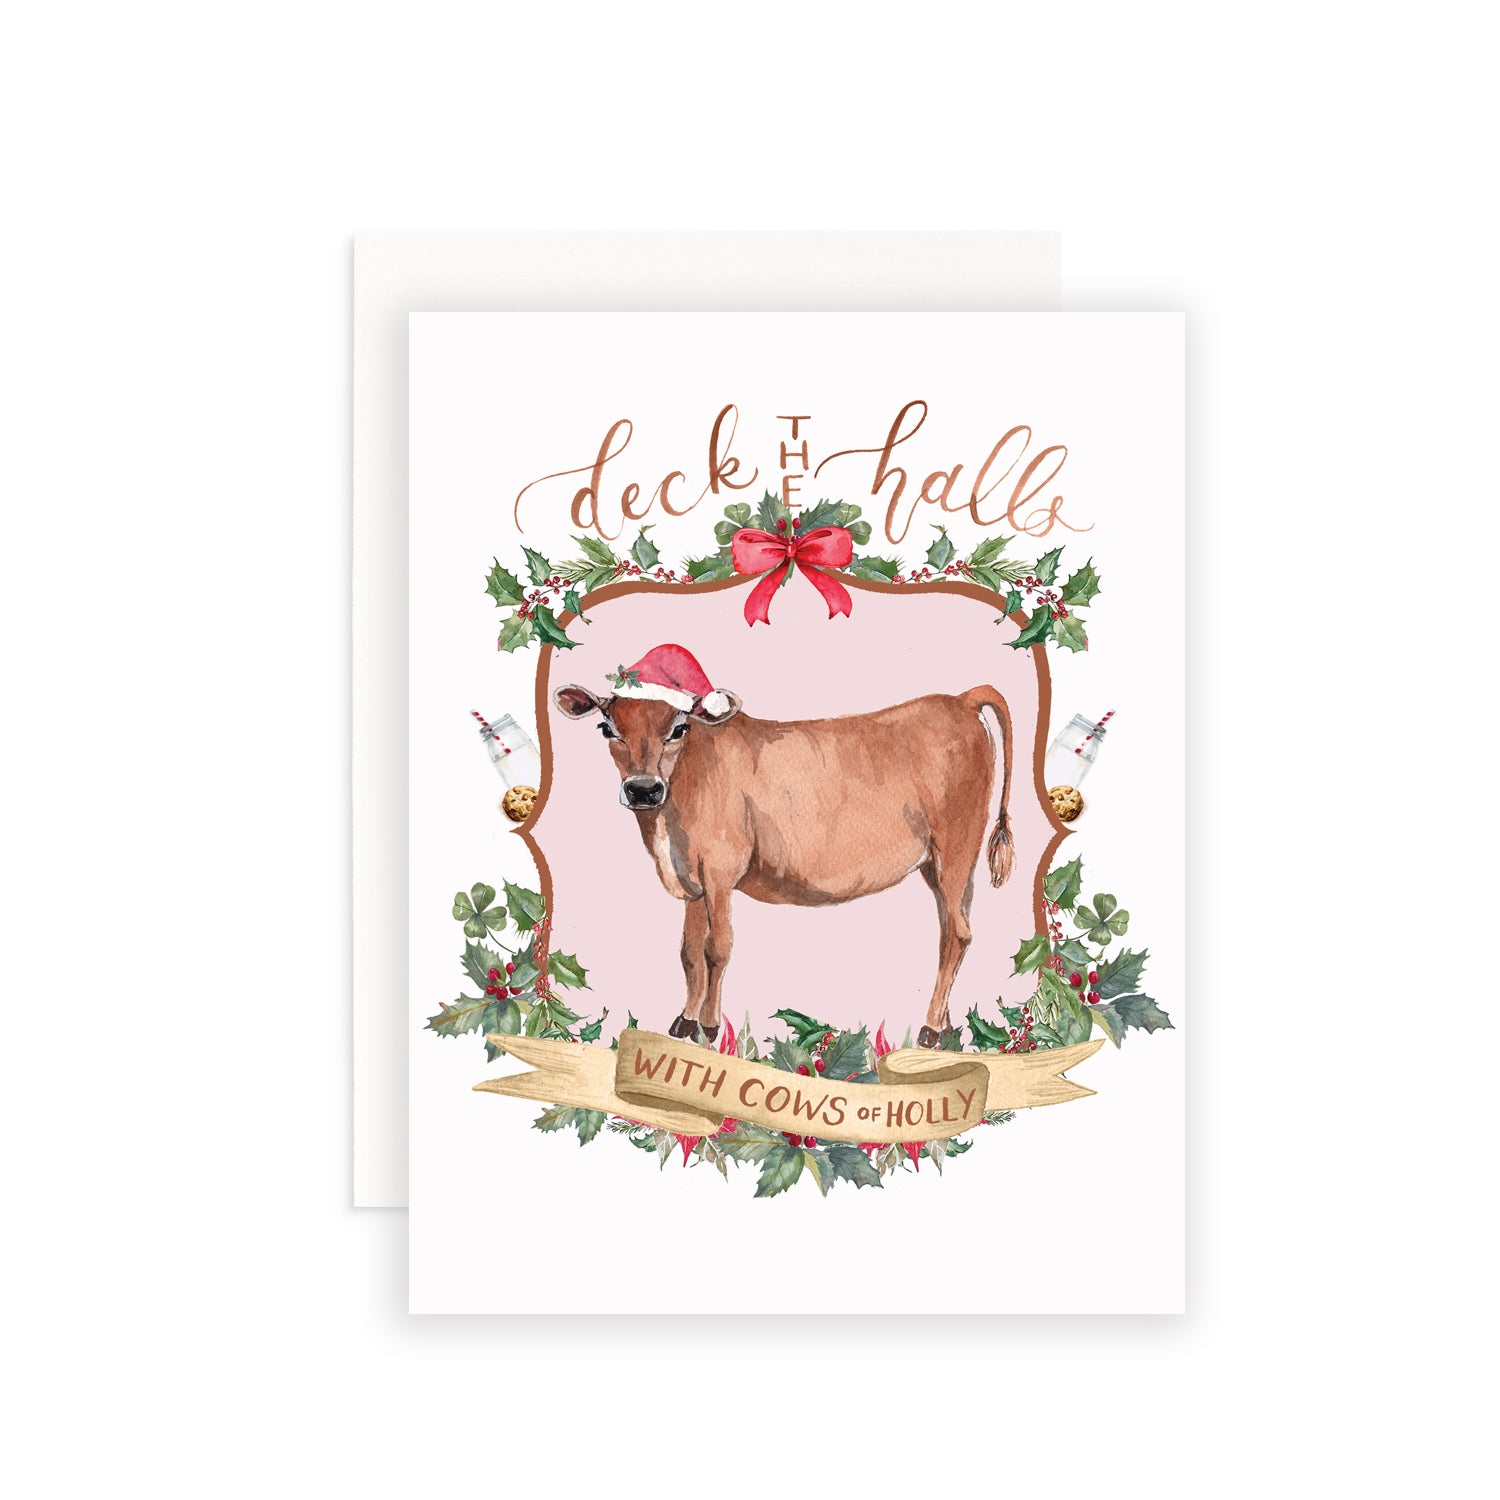 Deck the Halls with Cows of Holly Greeting Card